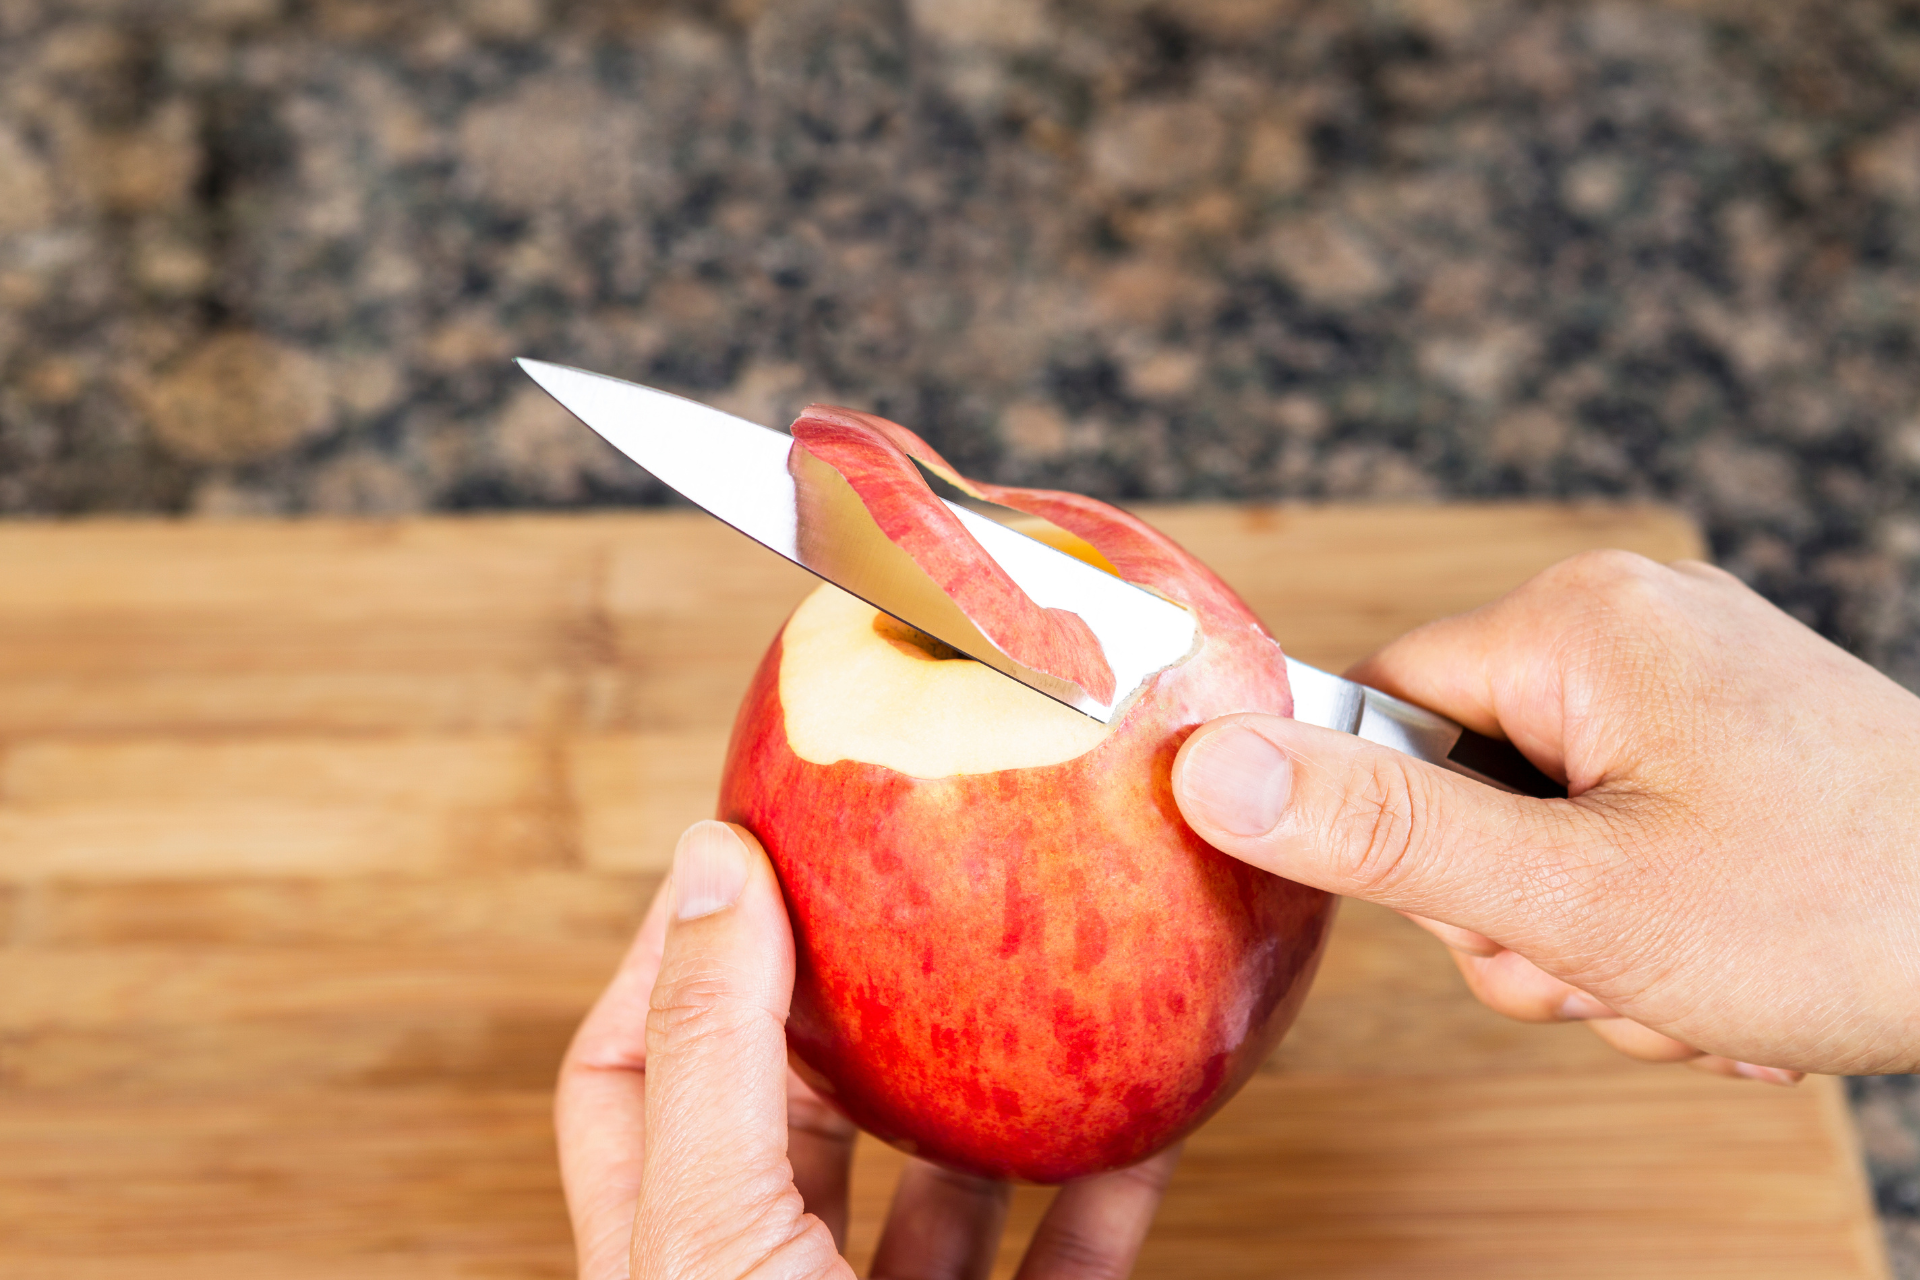 Close-up of a person’s hands using a peeling knife to peel an apple